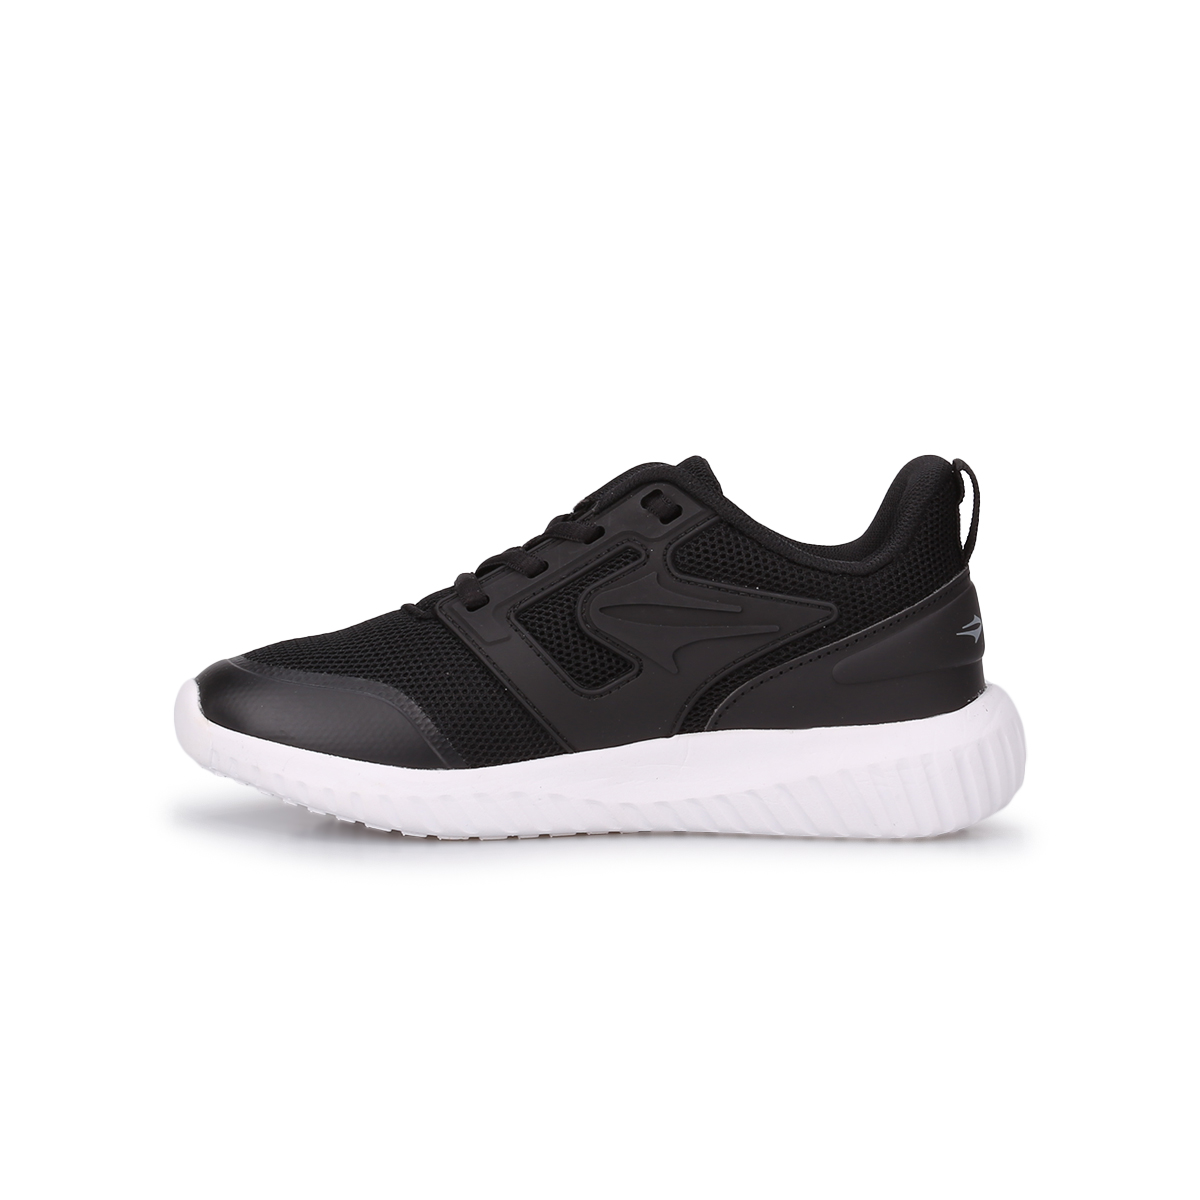 Zapatillas Topper Fast,  image number null